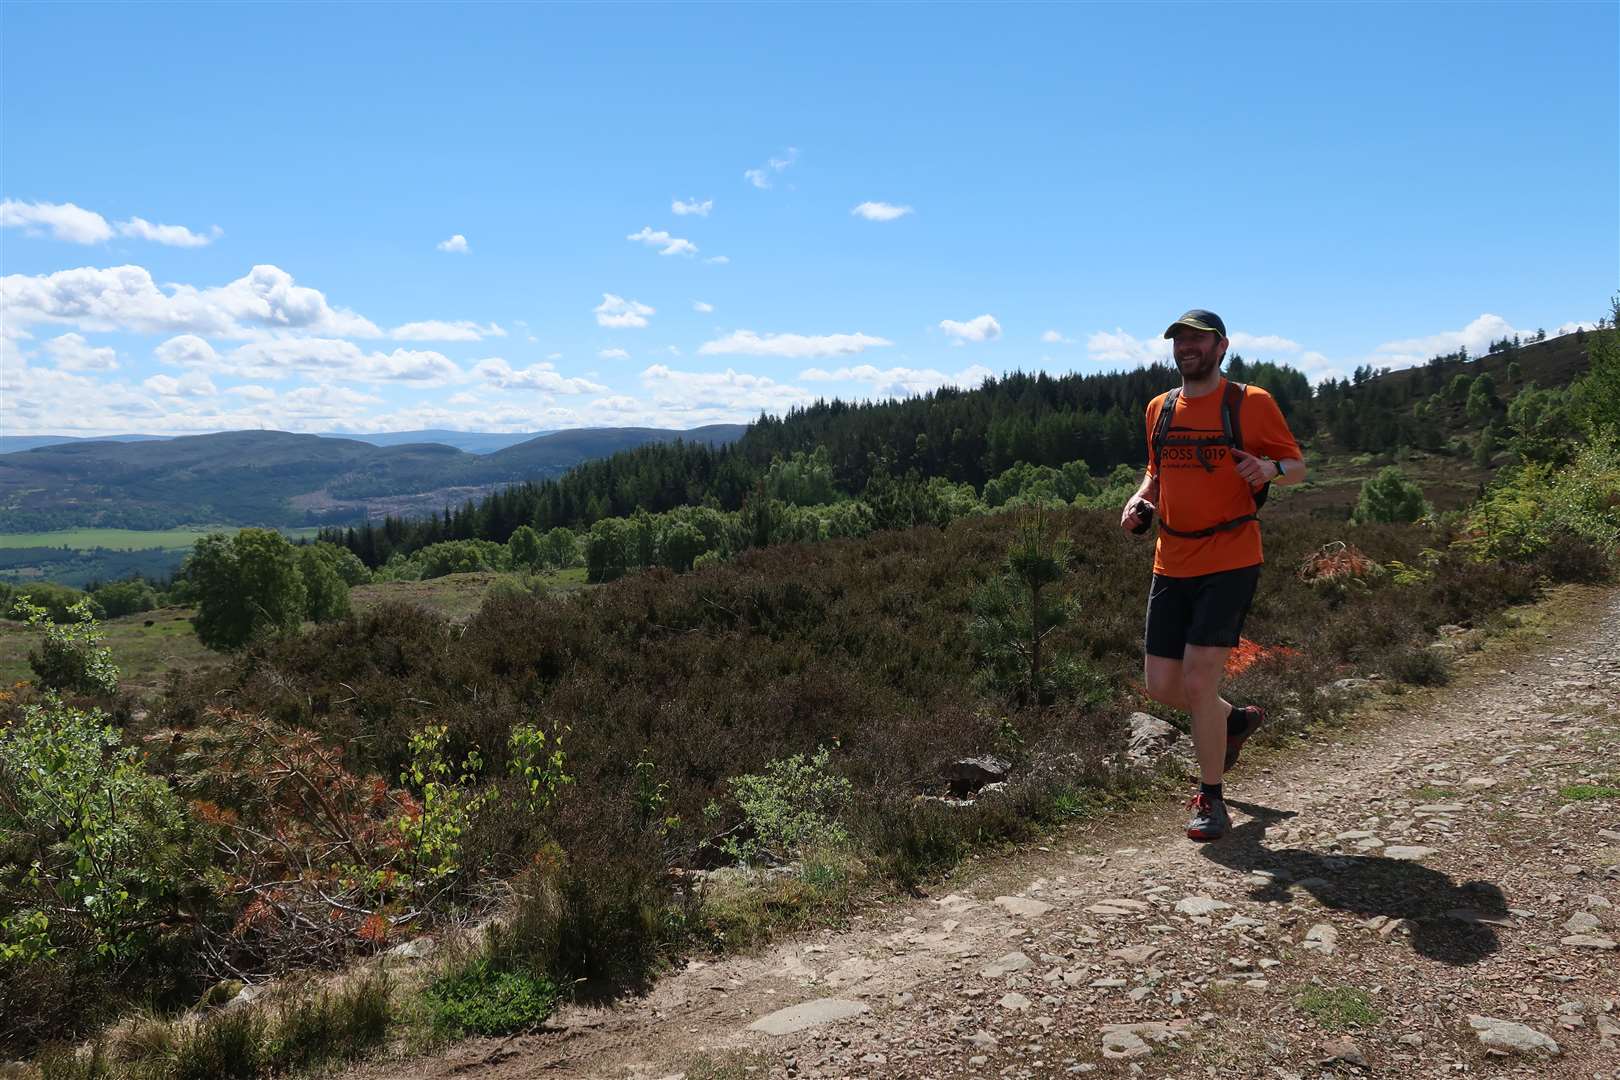 Active Outdoors editor John Davidson tries out part of the Loch Ness 360 route between Drumnadrochit and Abriachan.